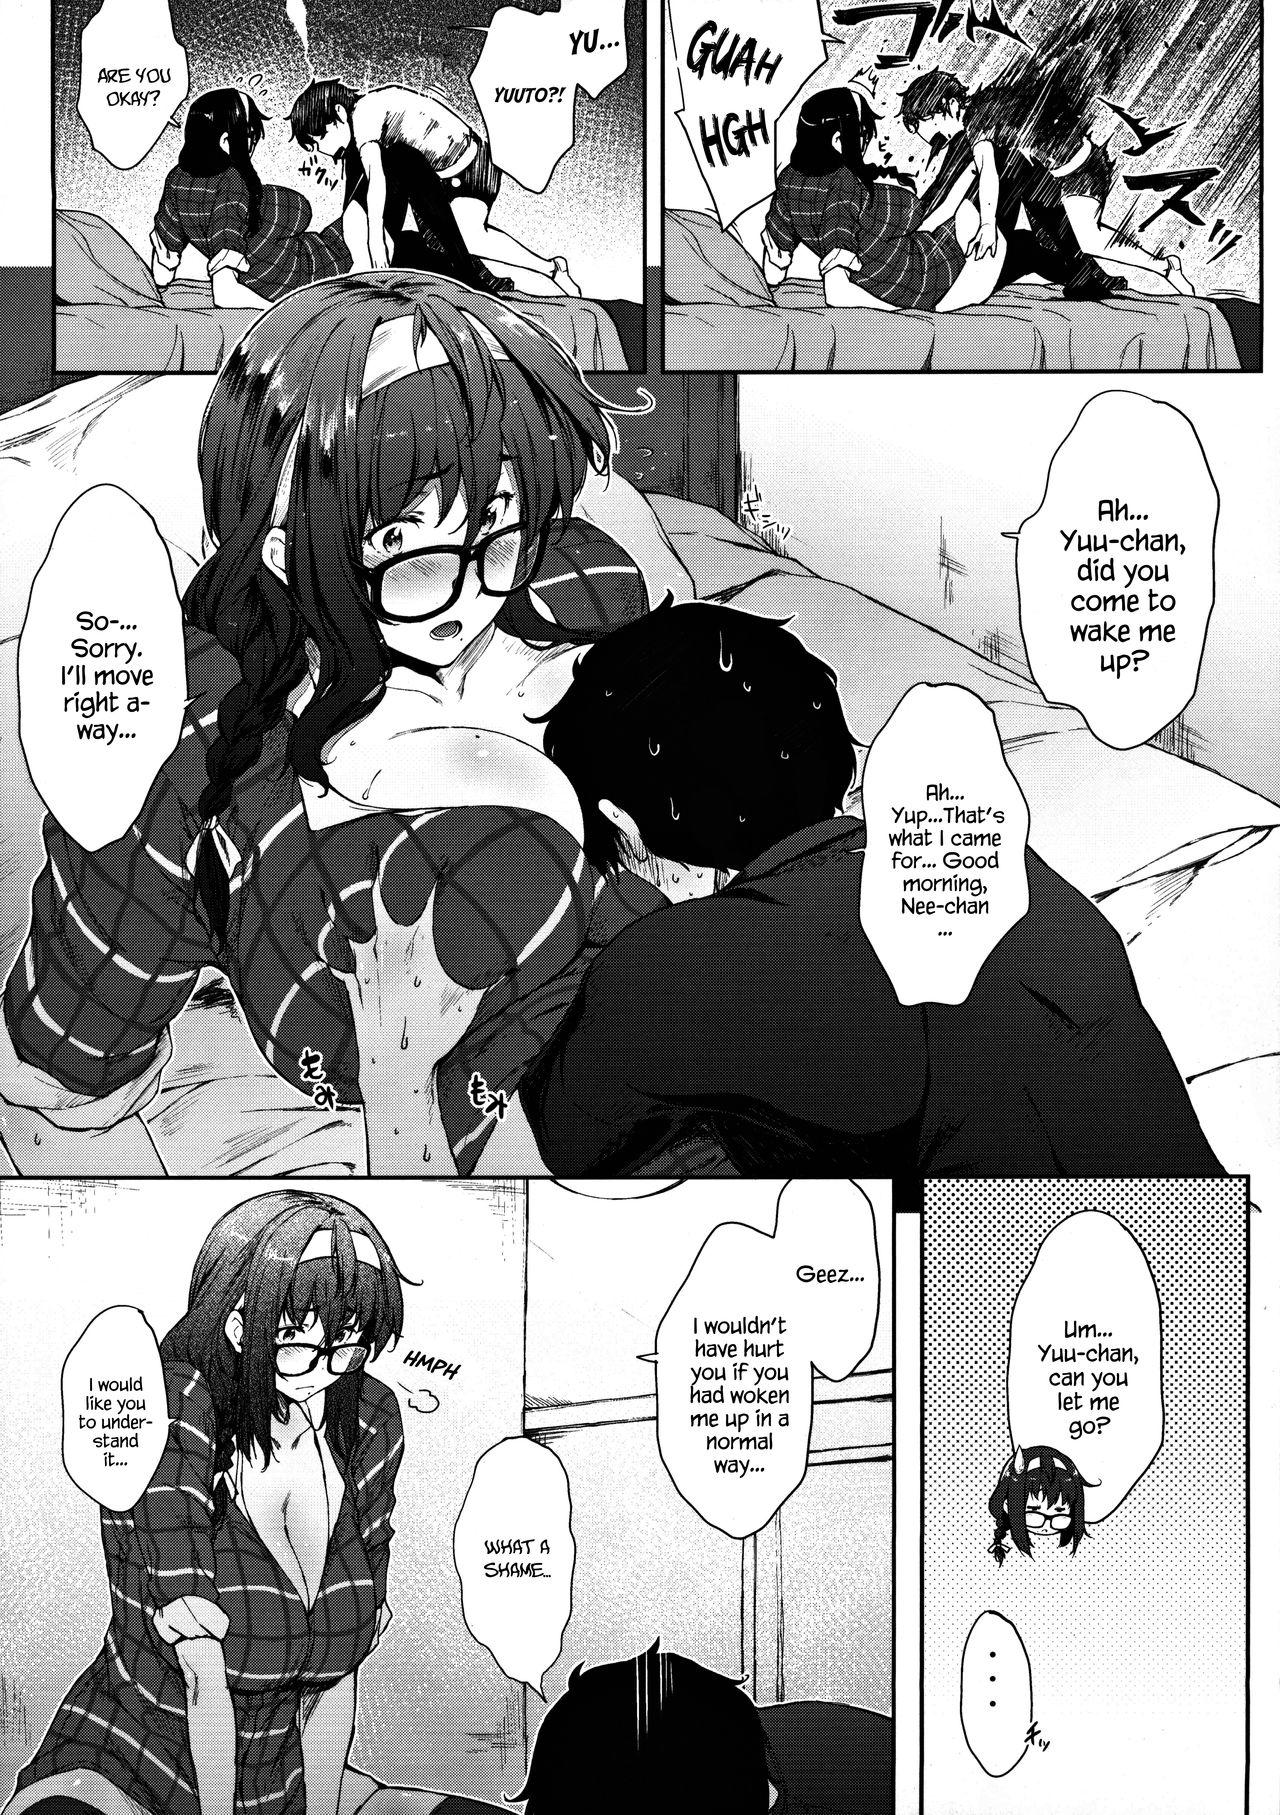 Cocksucker Babaa no Inu Ma ni Nee-chan to | With My Stepsister While My Mom's Not Home - Original Pussy Fuck - Page 5